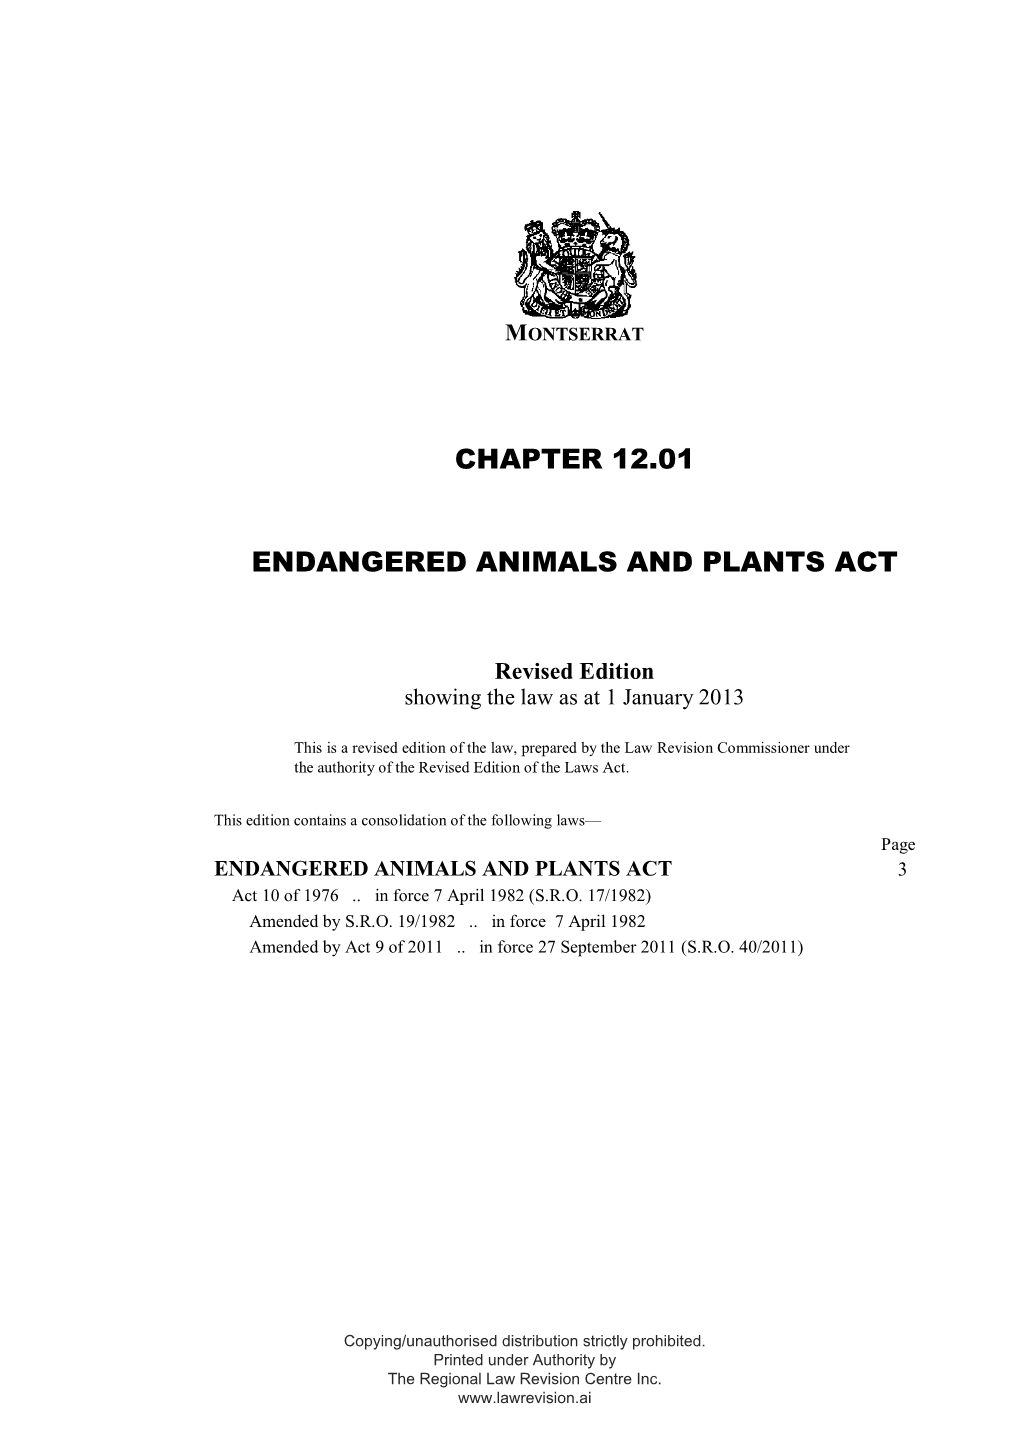 Endangered Animals and Plants Act